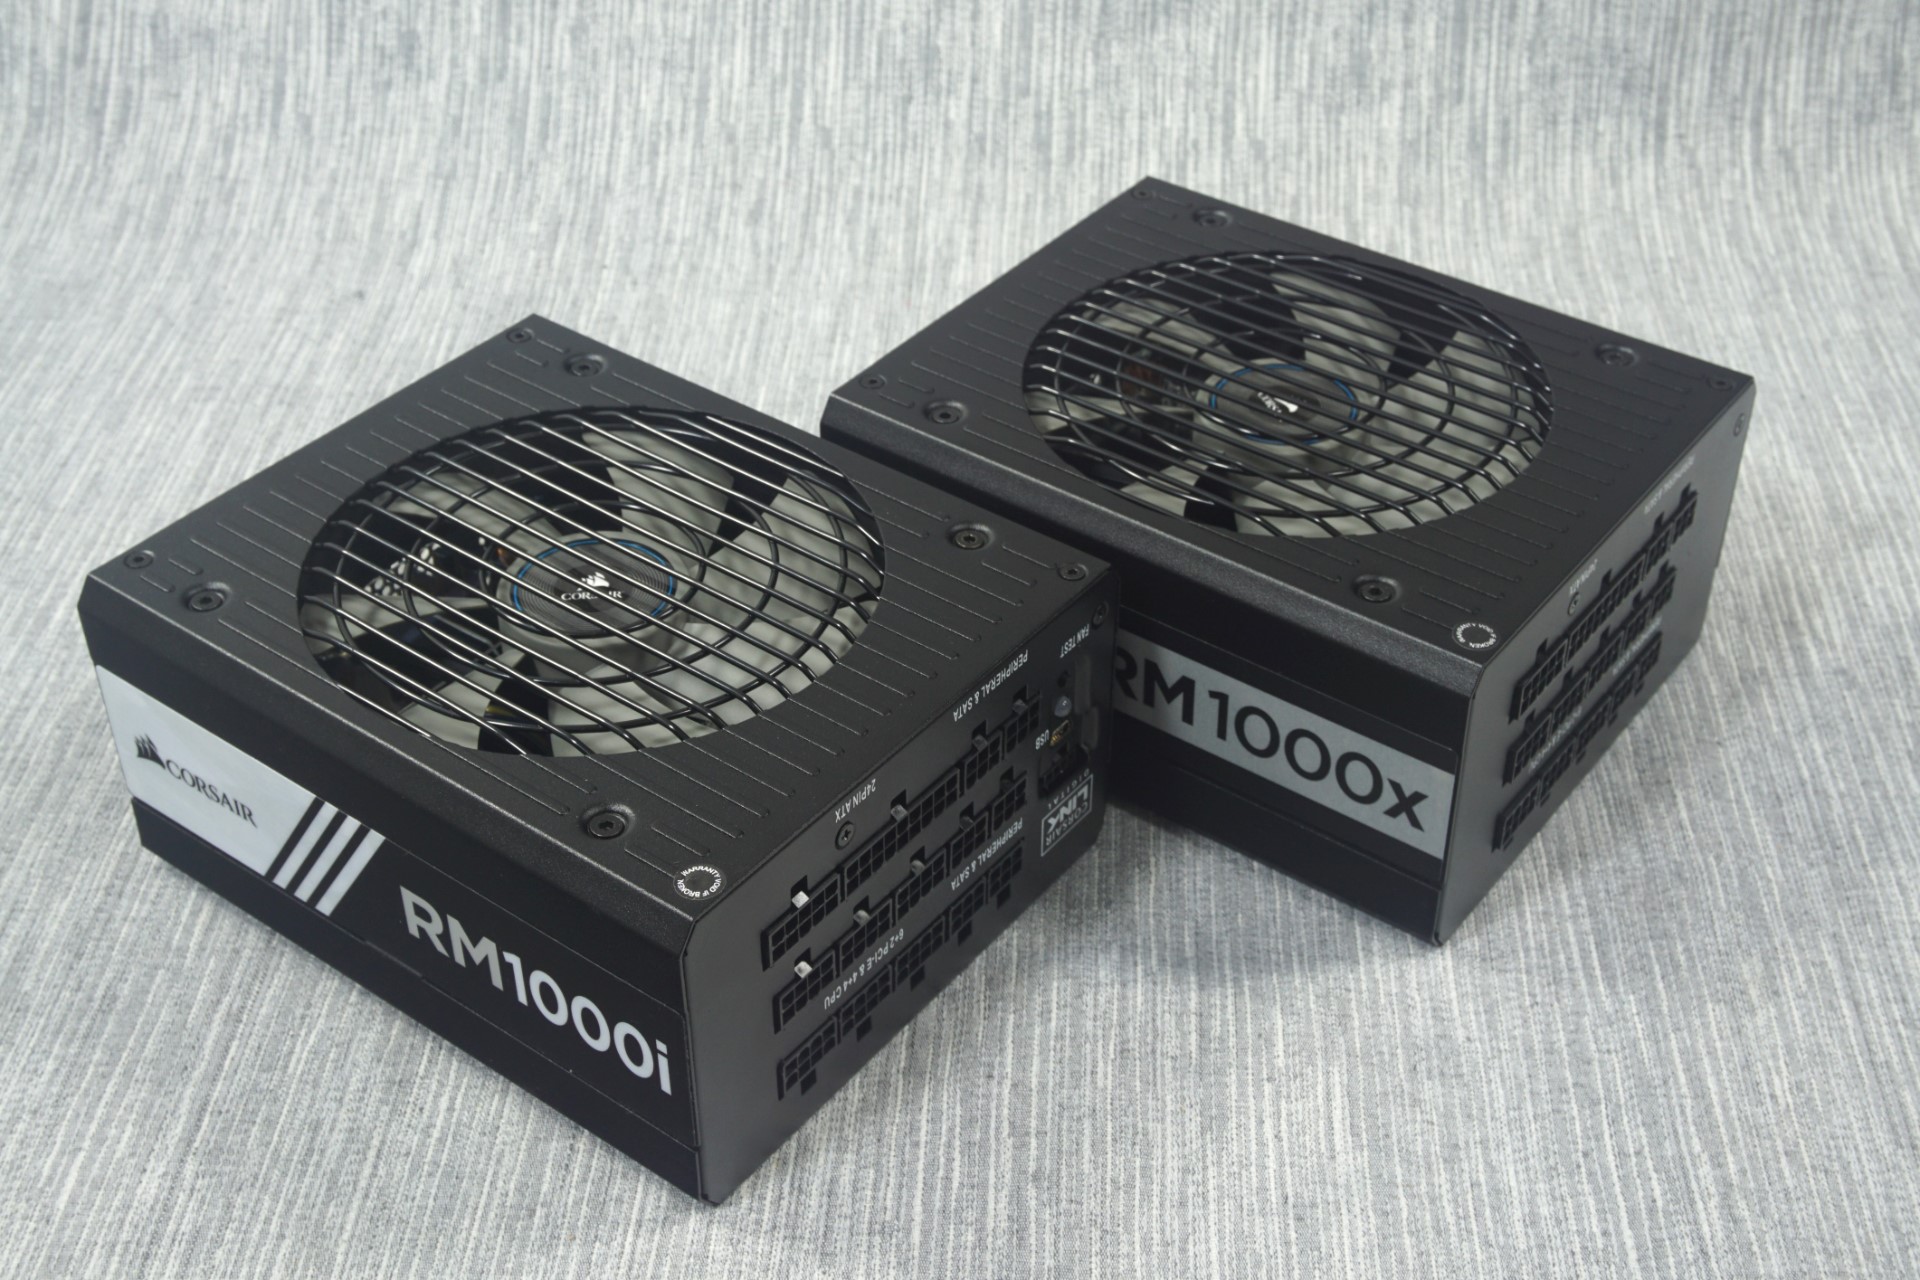 Final & Conclusion - The Corsair RM1000x and RM1000i 1000W Power Review